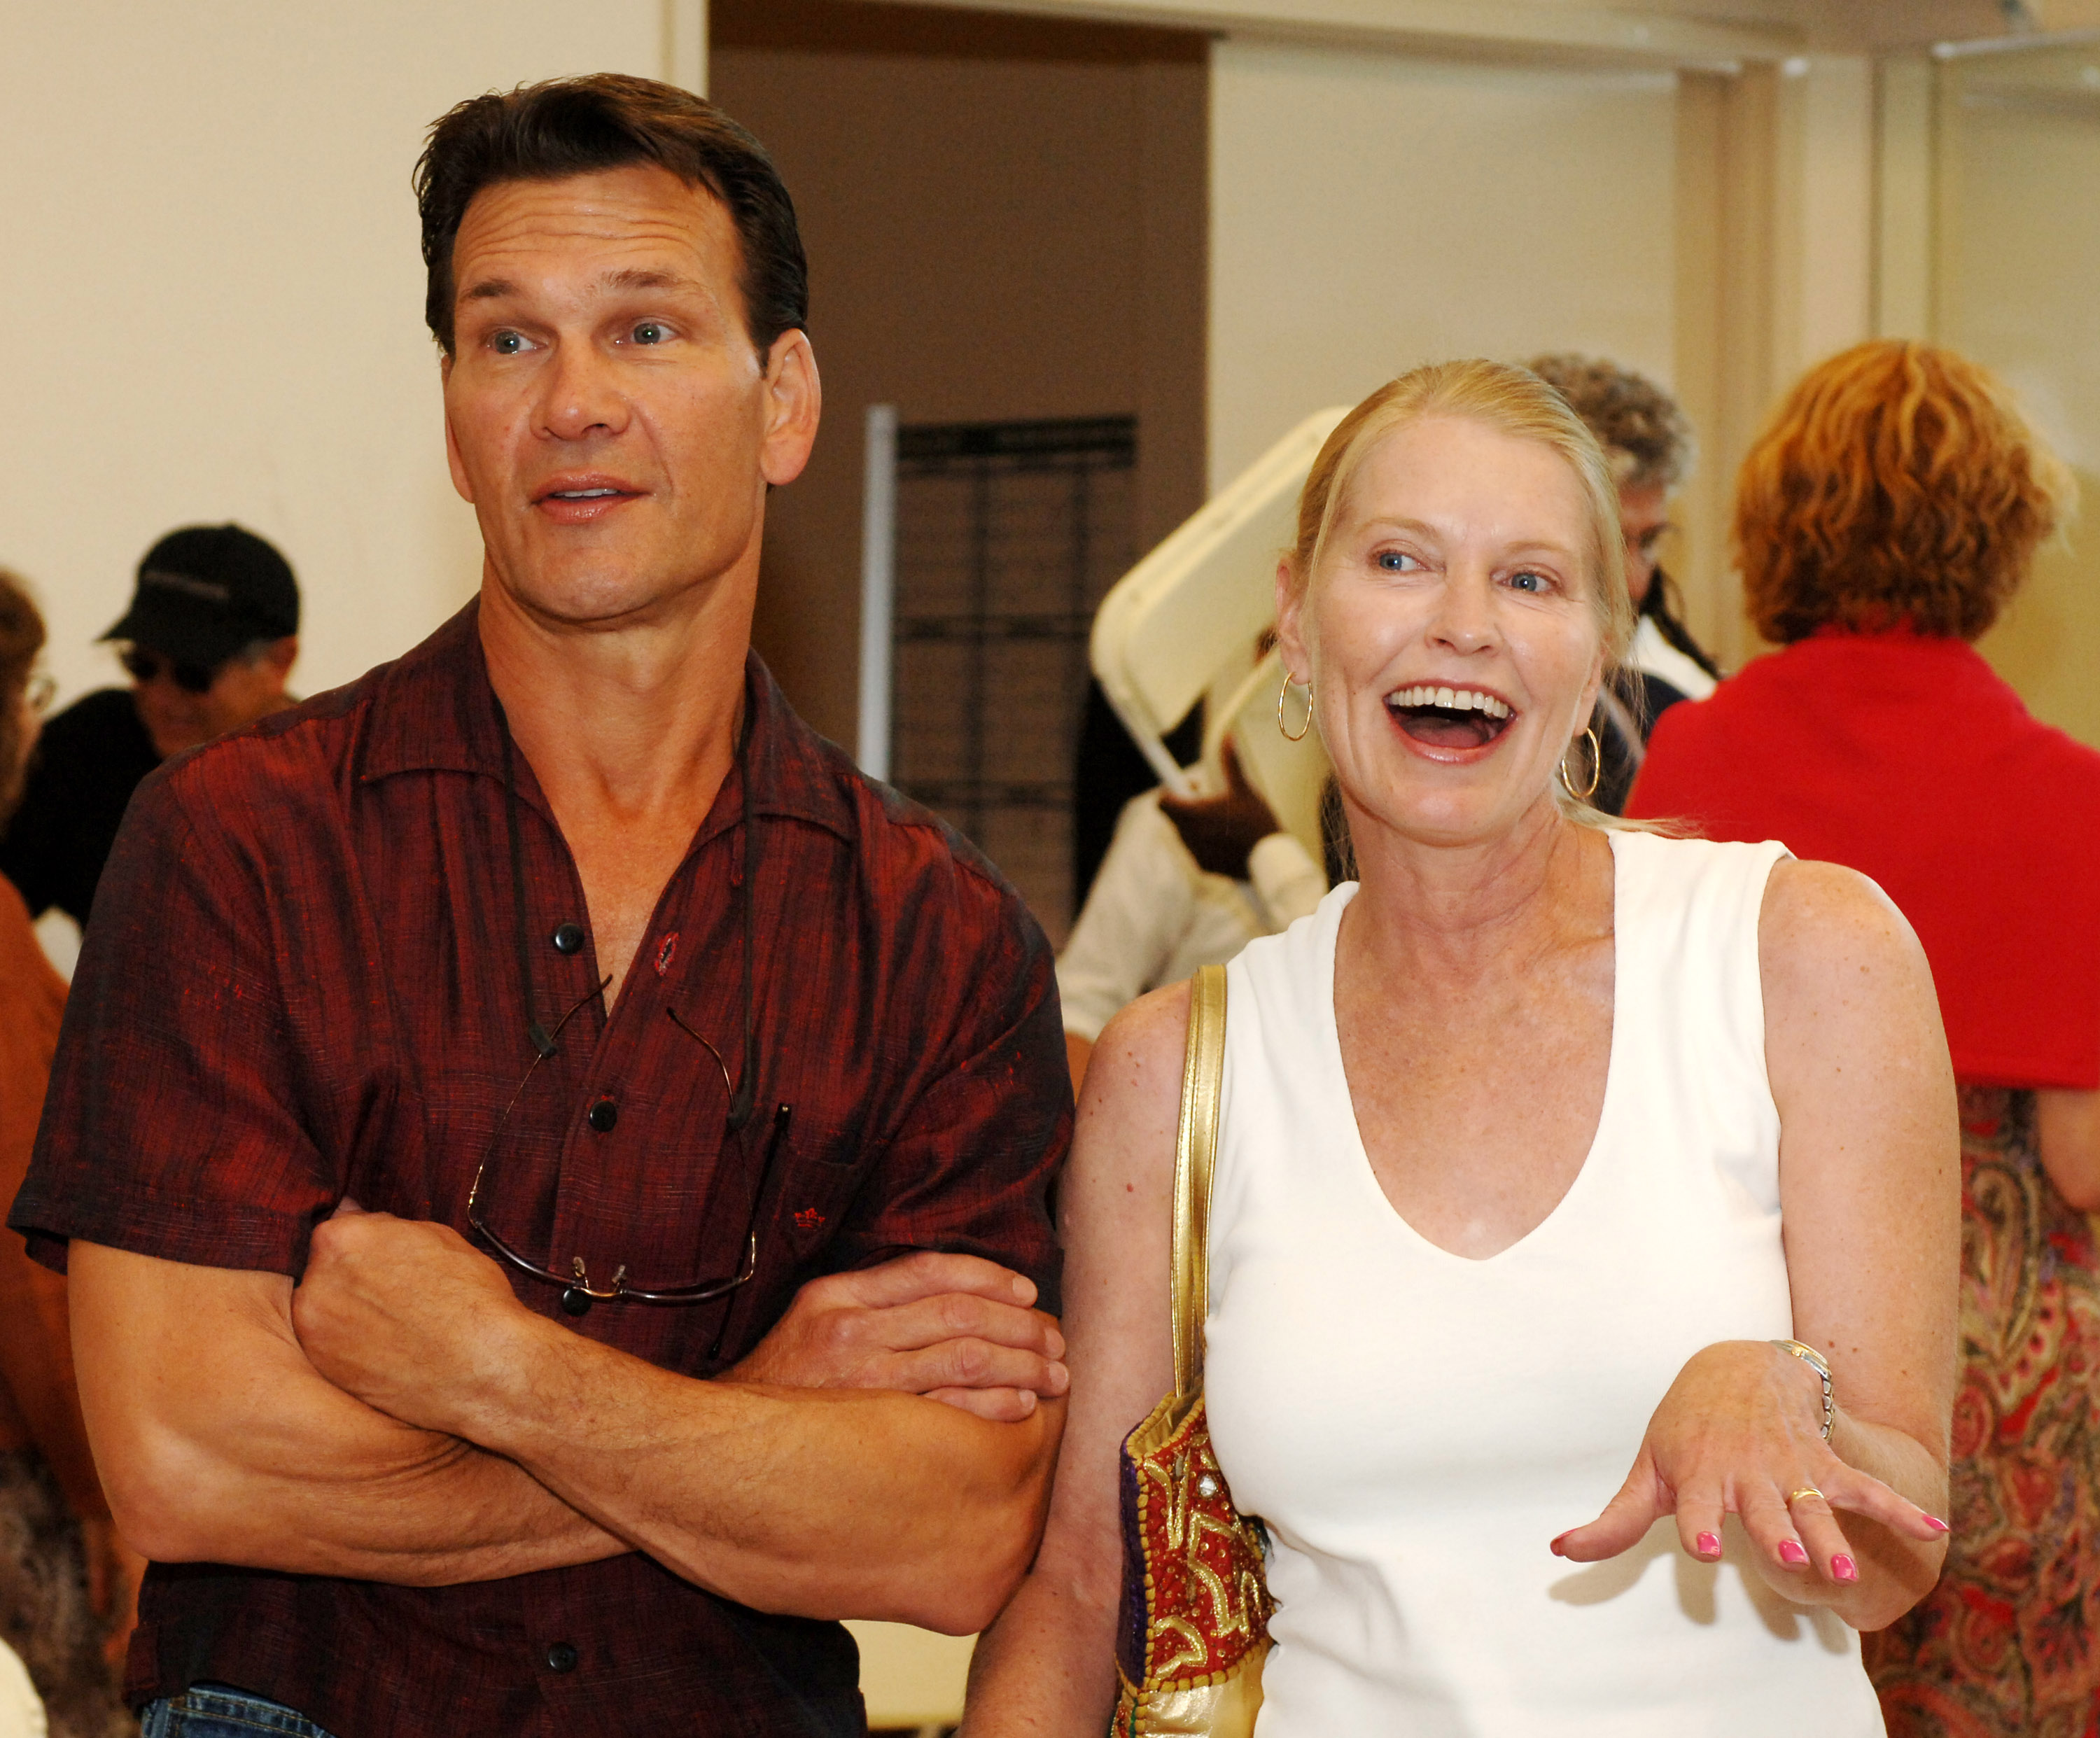 Patrick Swayze and Lisa Niemi visit the Nevada Ballet Theater to promote their movie "One Last Dance" on July 28, 2005 | Source: Getty Images